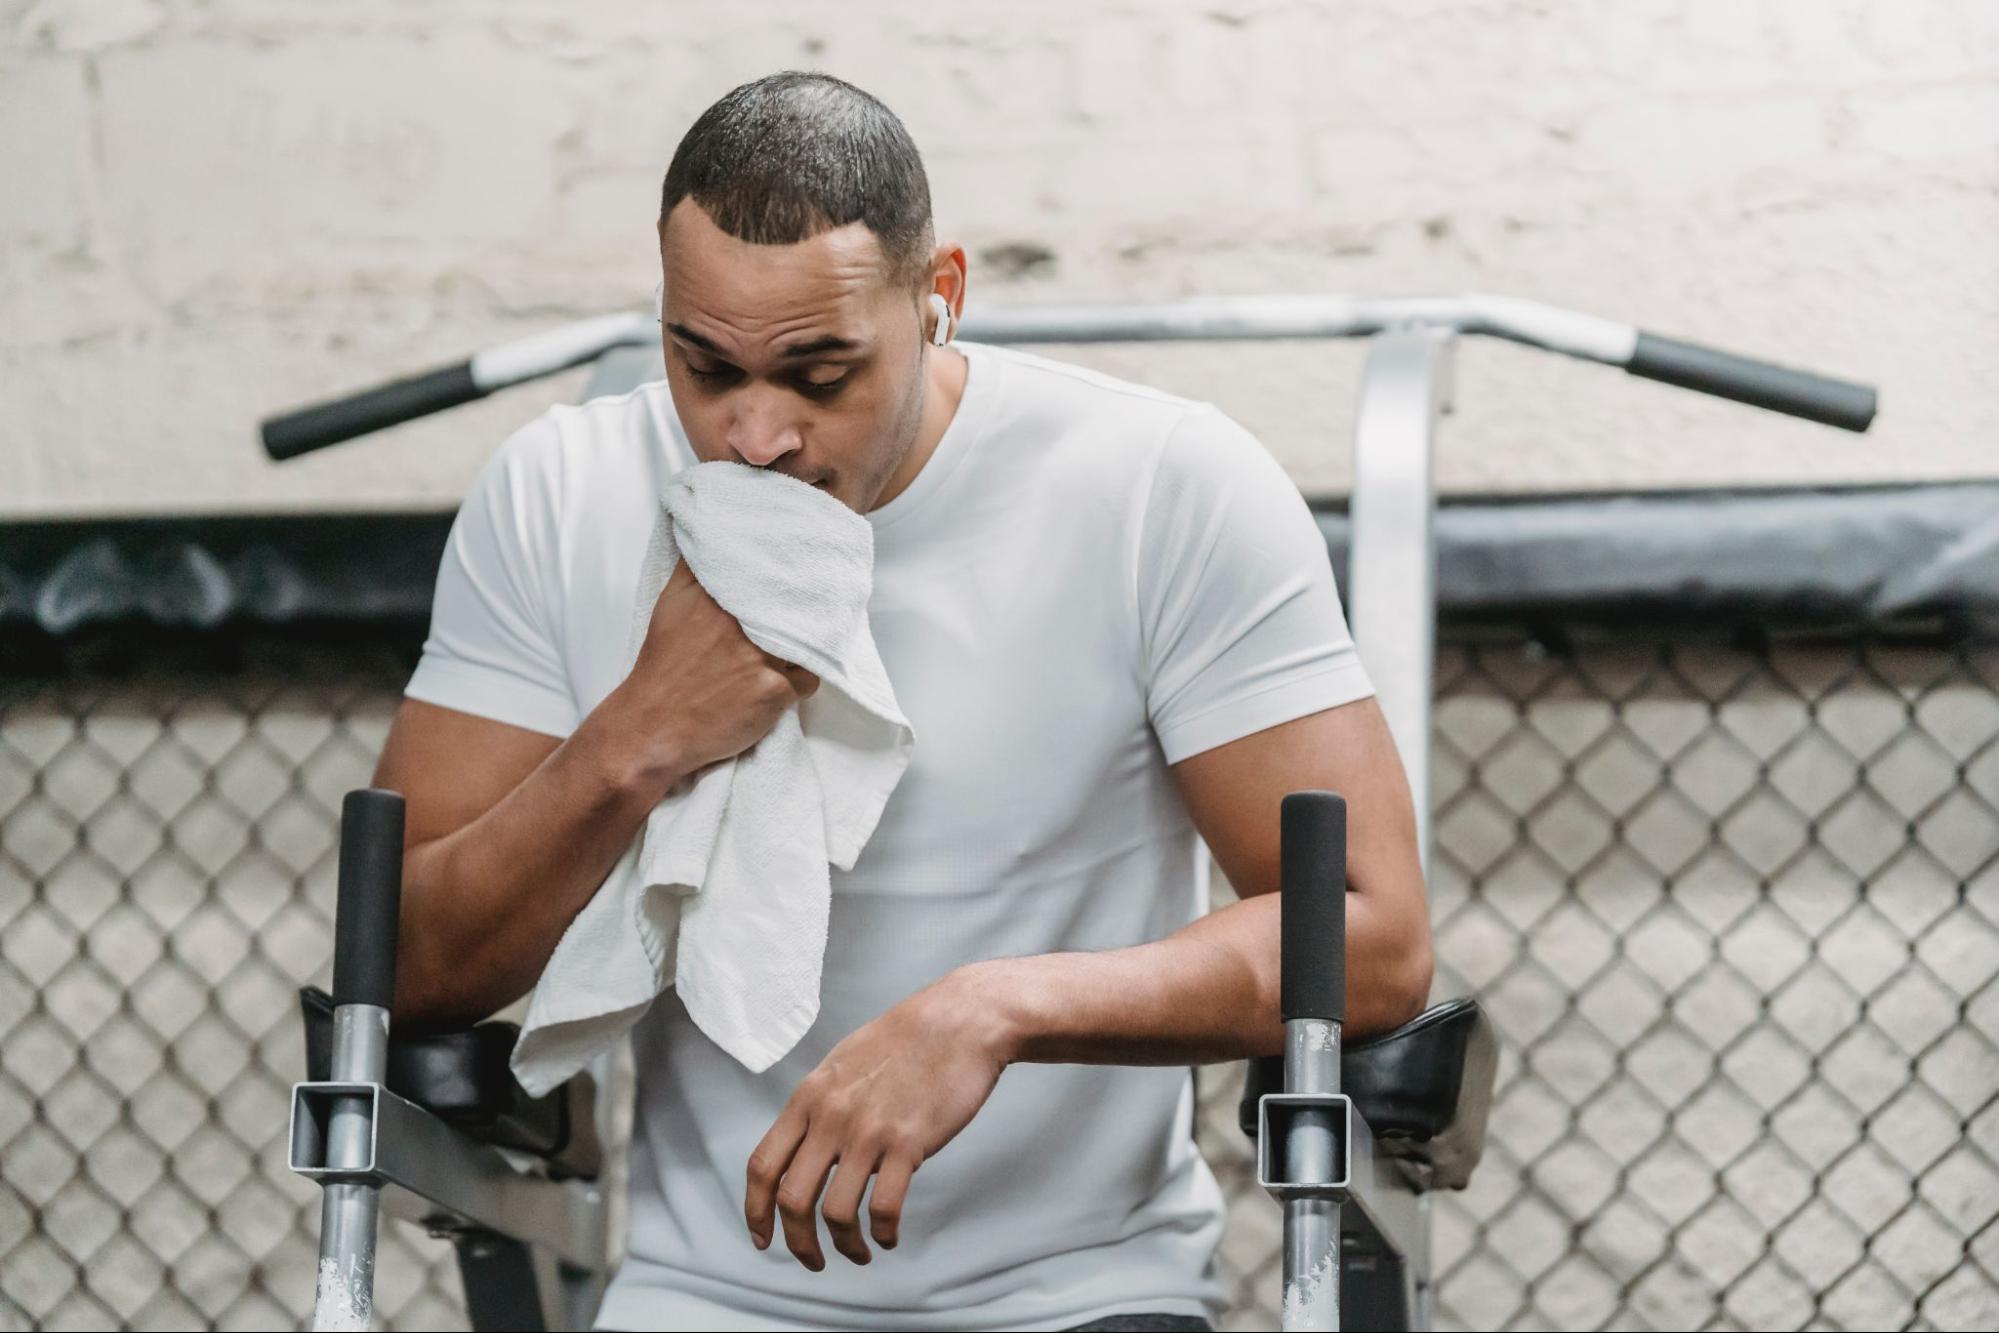 Man wiping sweat off of face after exercising